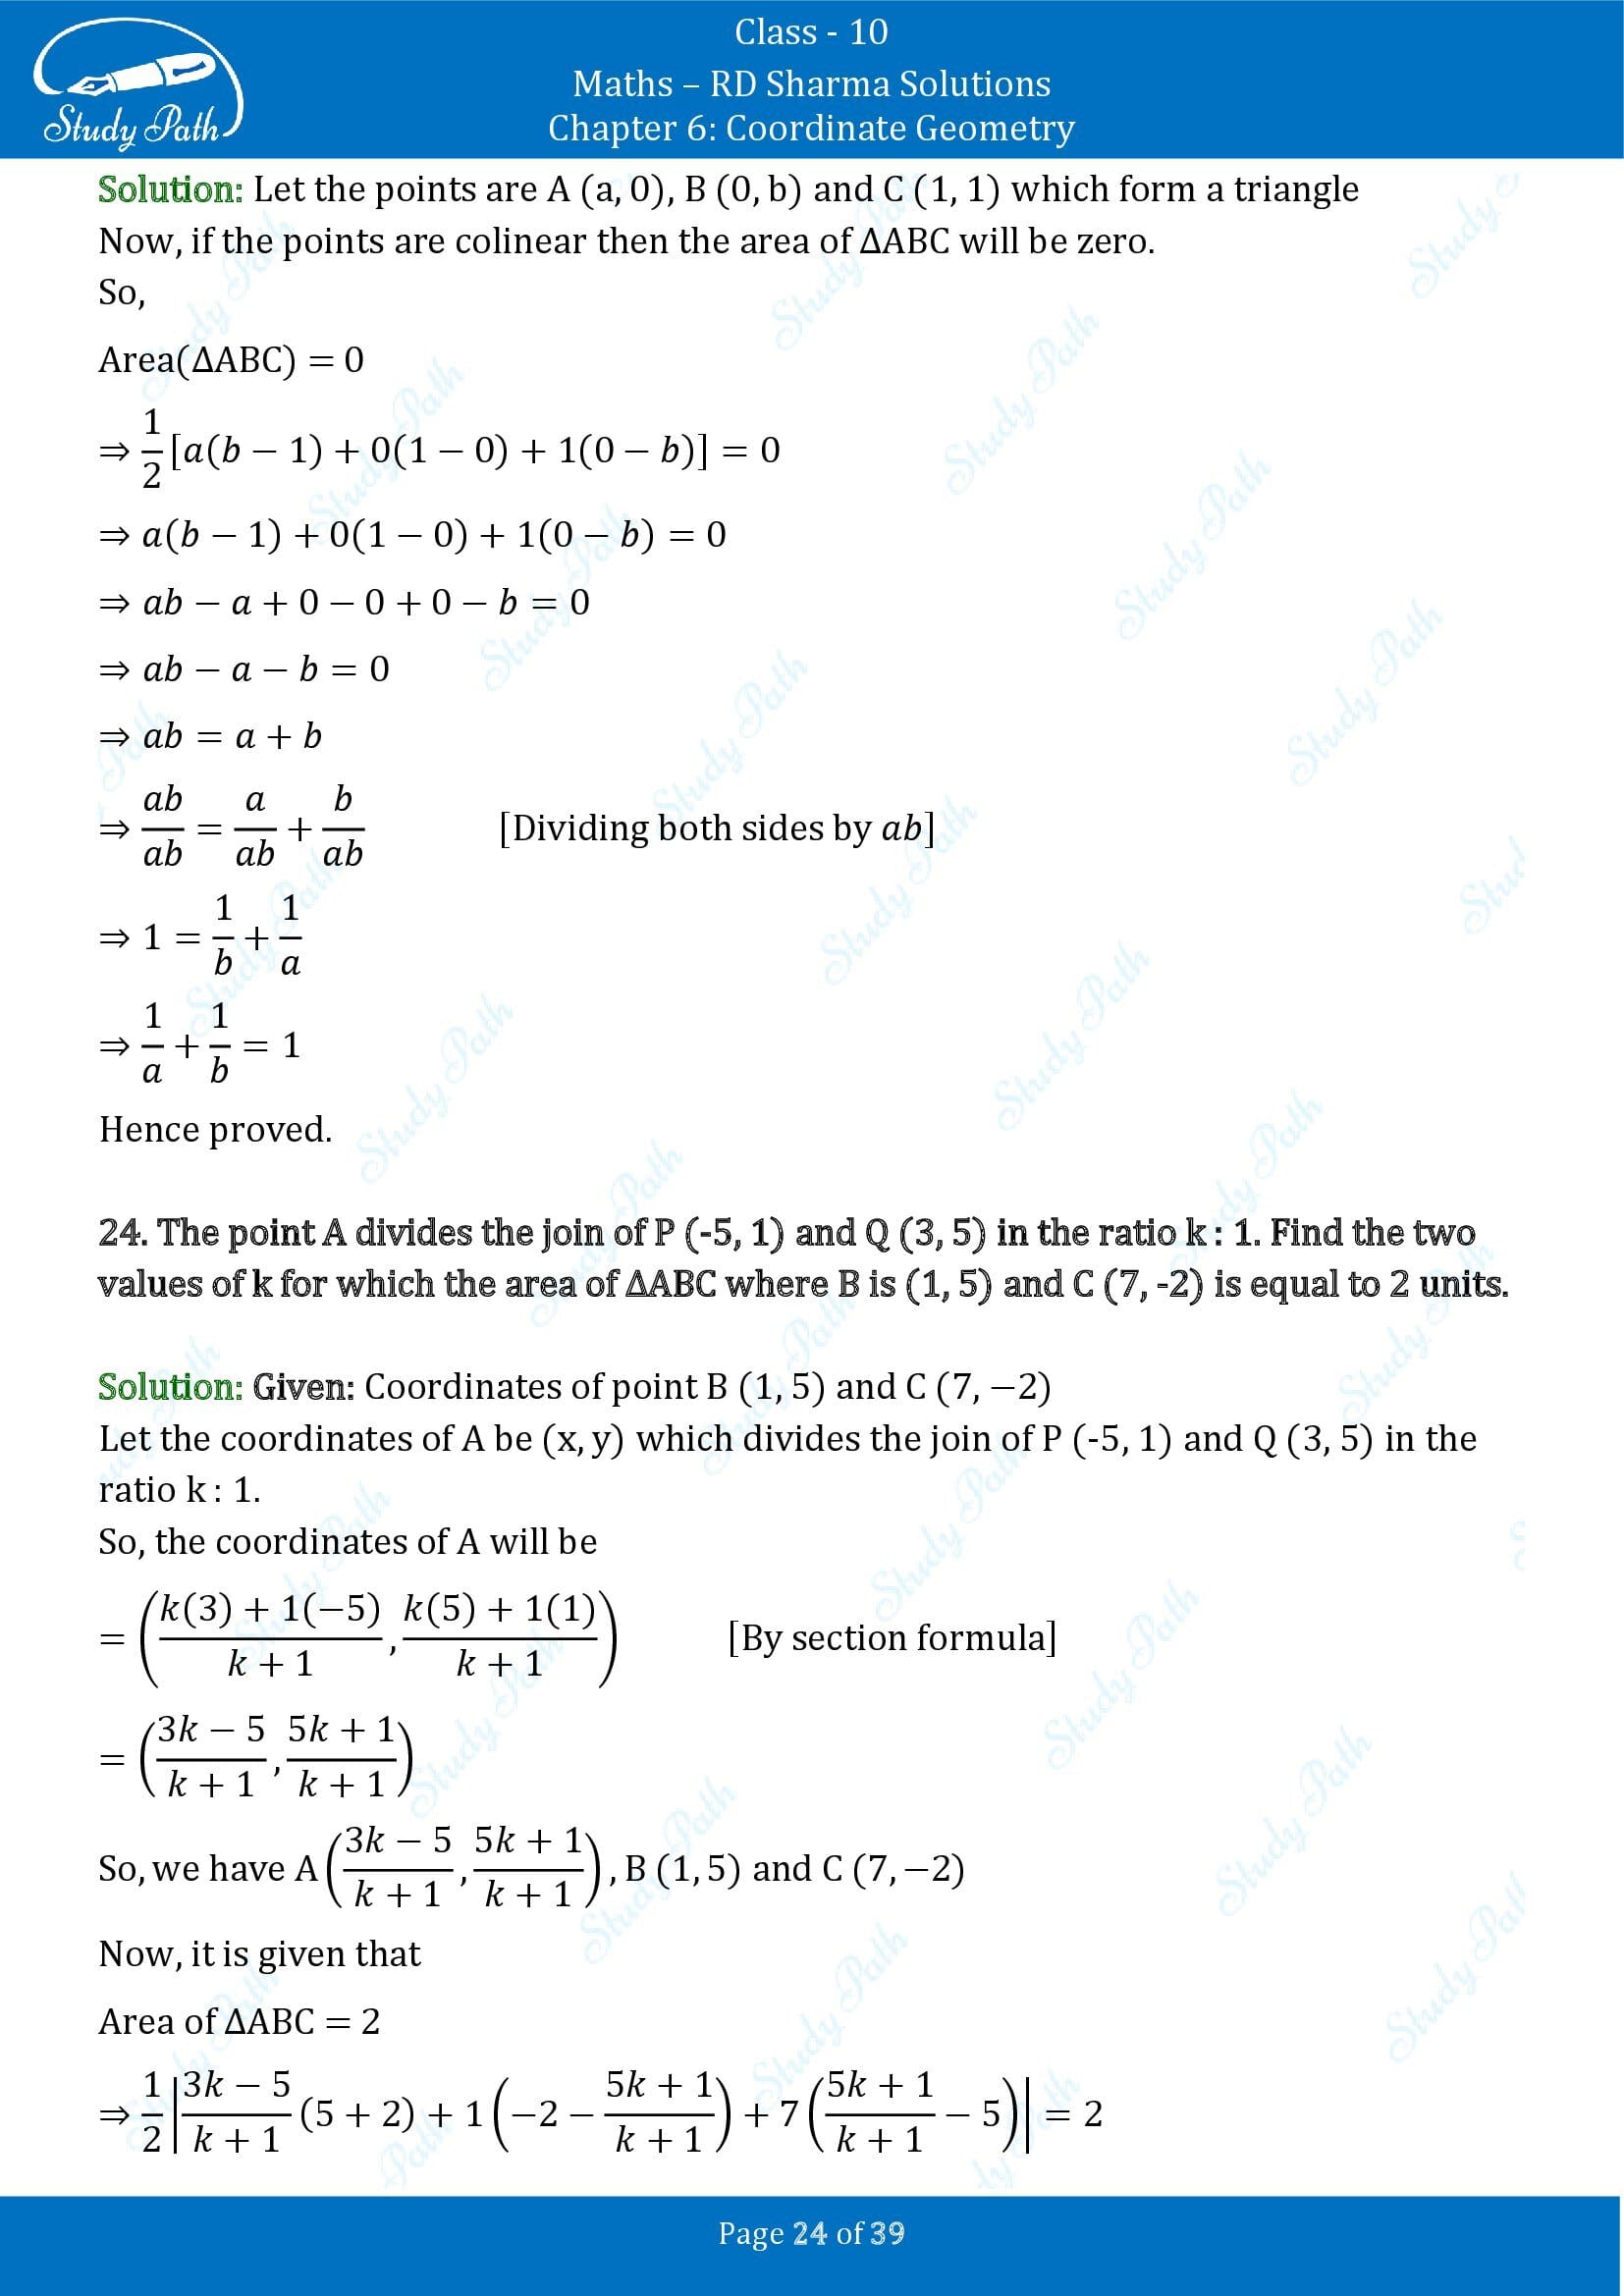 RD Sharma Solutions Class 10 Chapter 6 Coordinate Geometry Exercise 6.5 0024